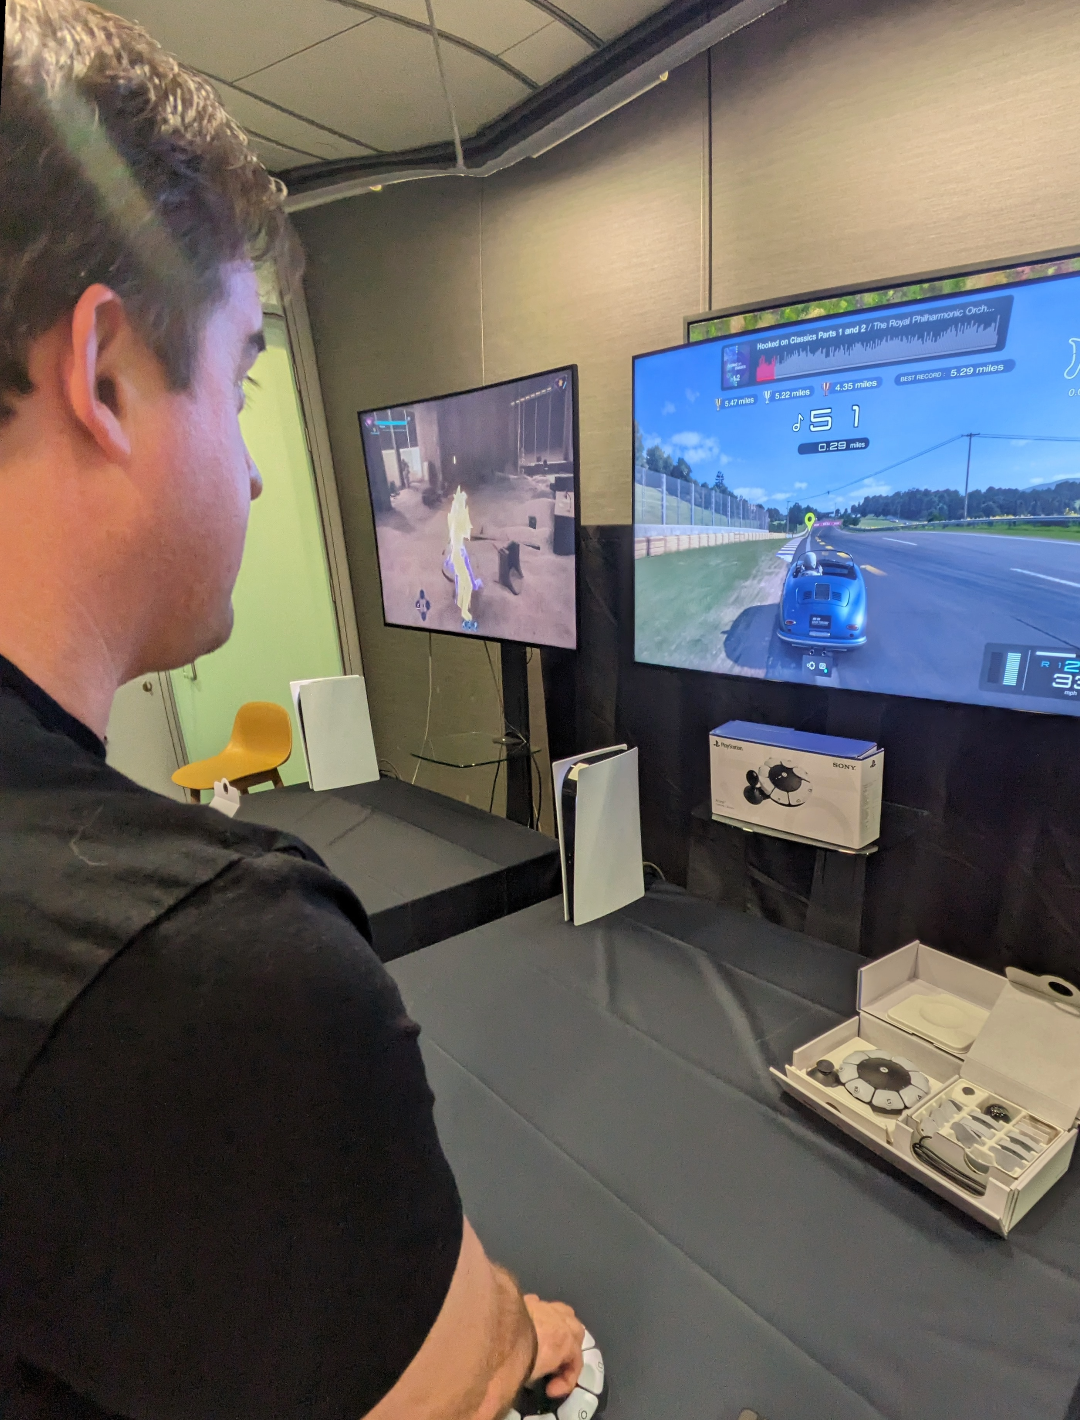 Chris stands in front of a screen displaying a game - he is using Sony's new Access controller, which is a circular controller with buttons around the edge